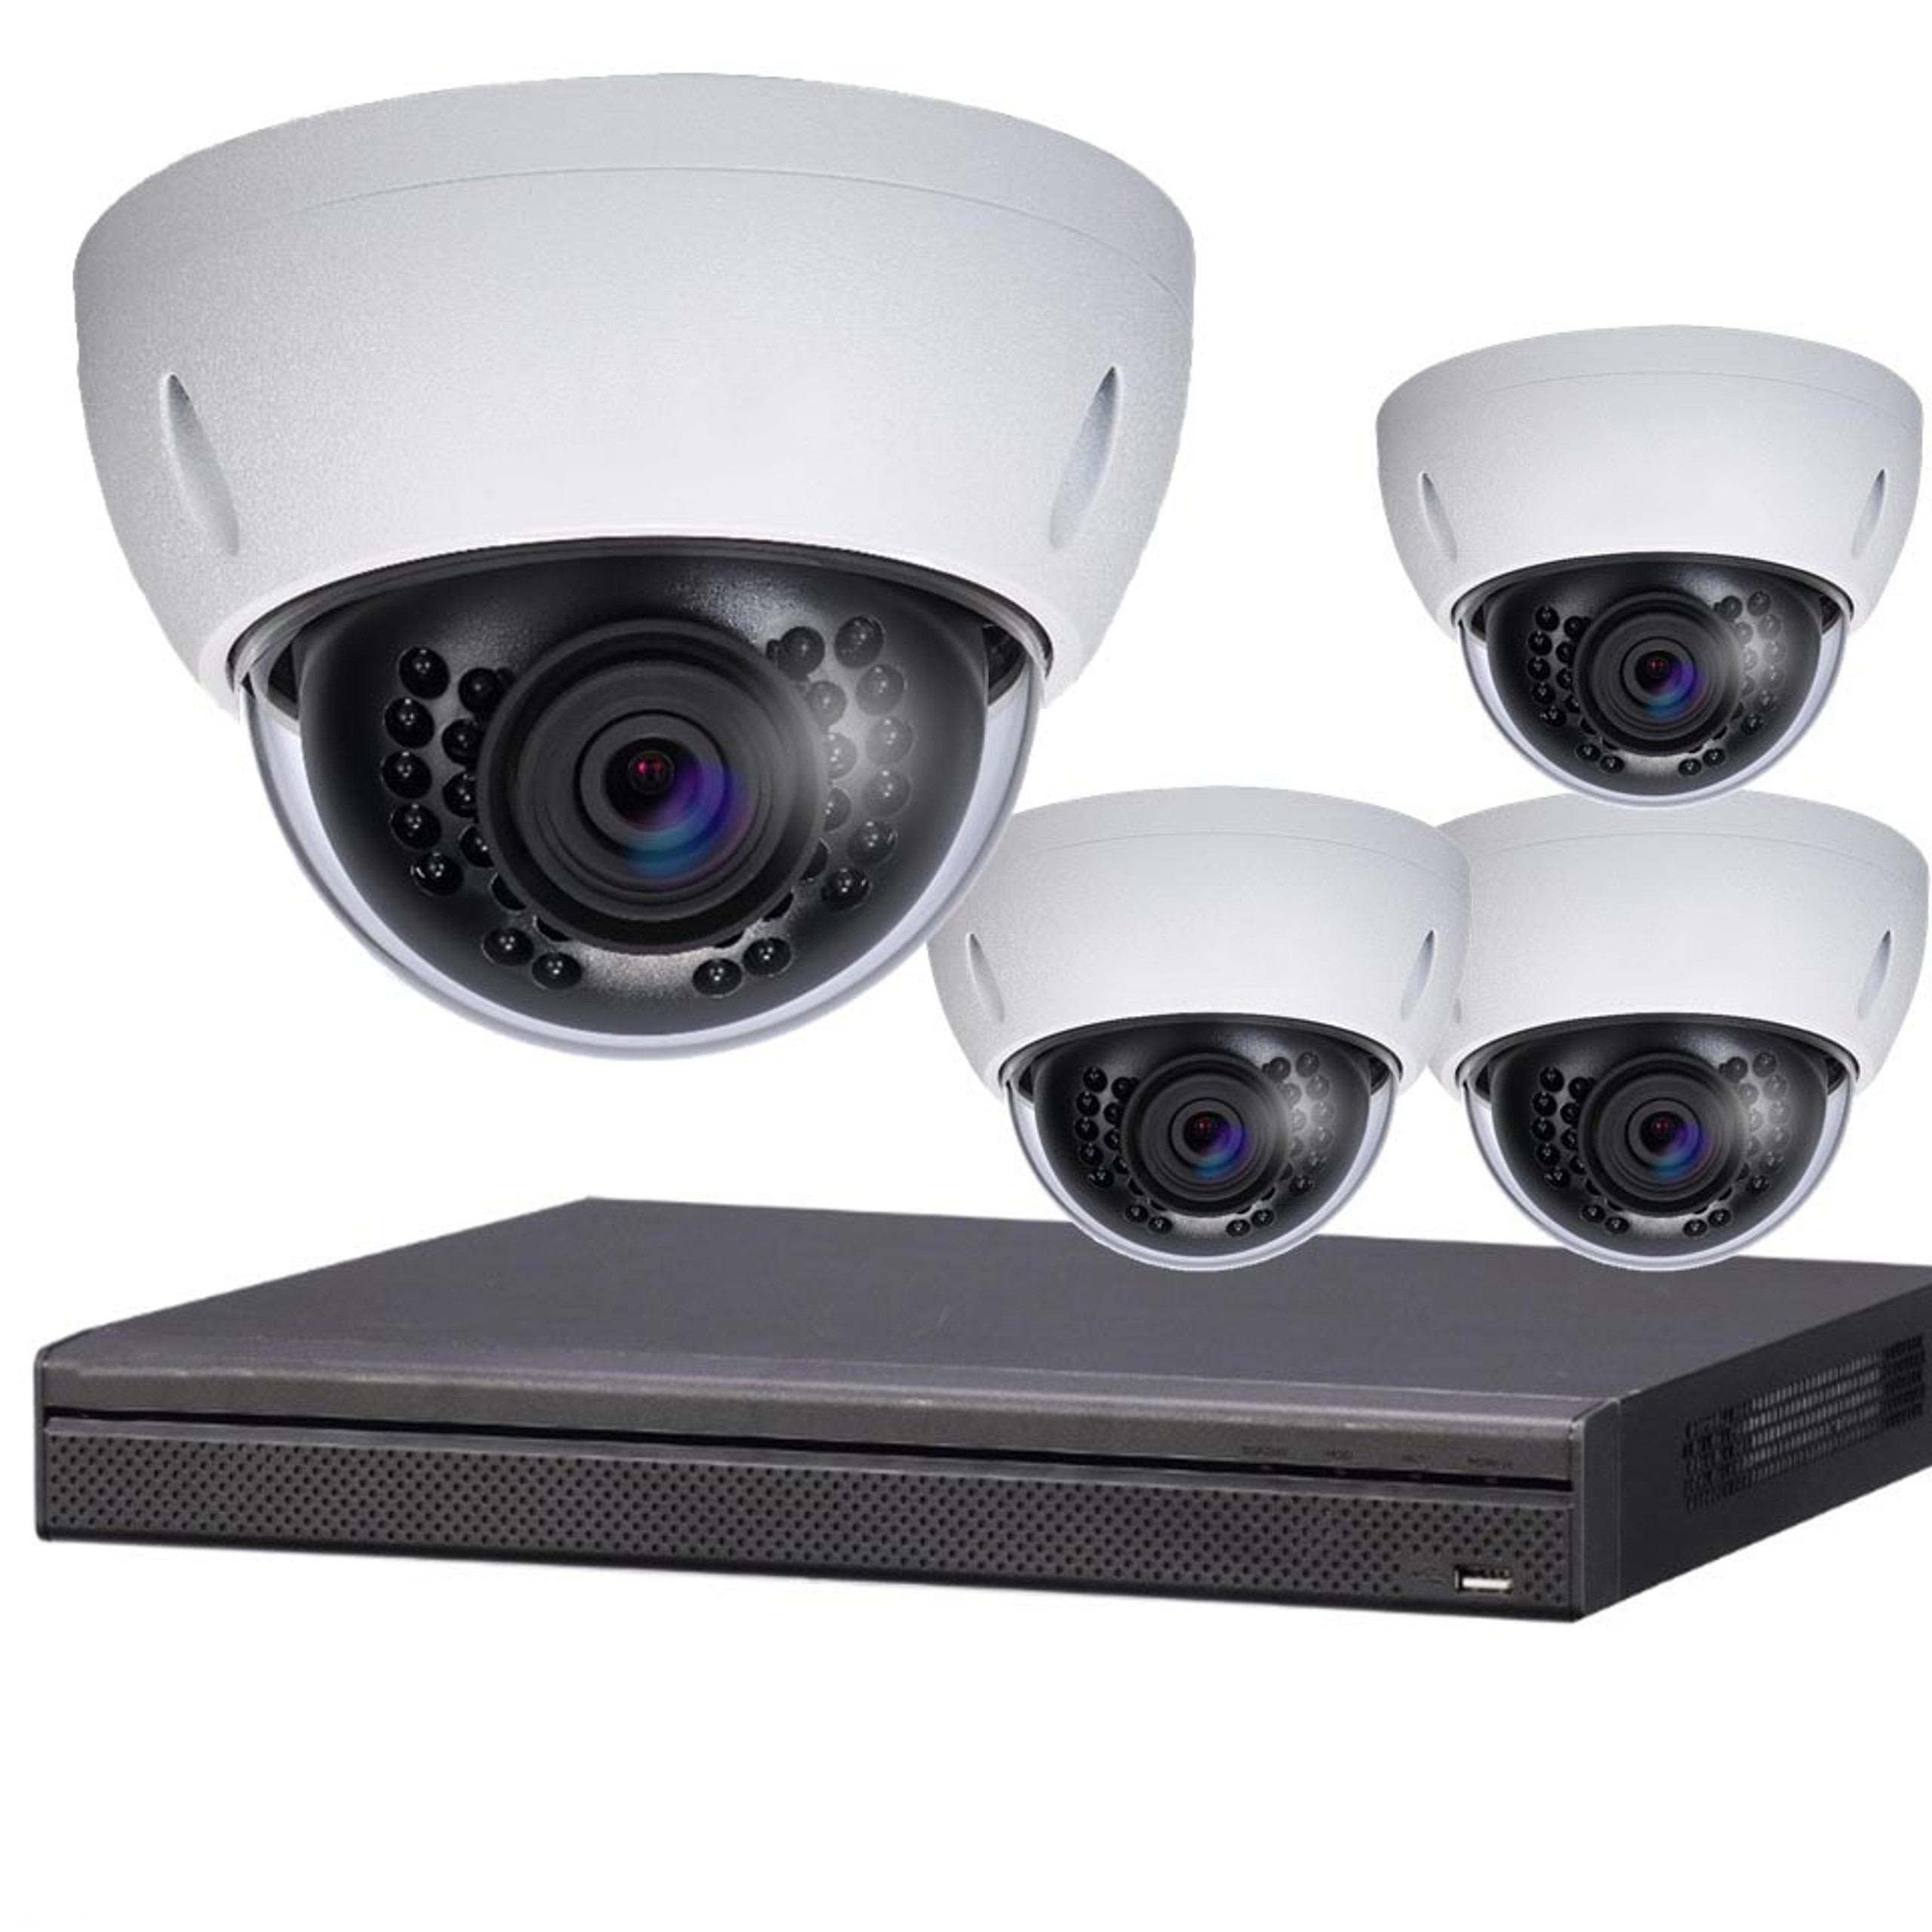 Dahua N588D63S 6 Camera Outdoor Dome IP System